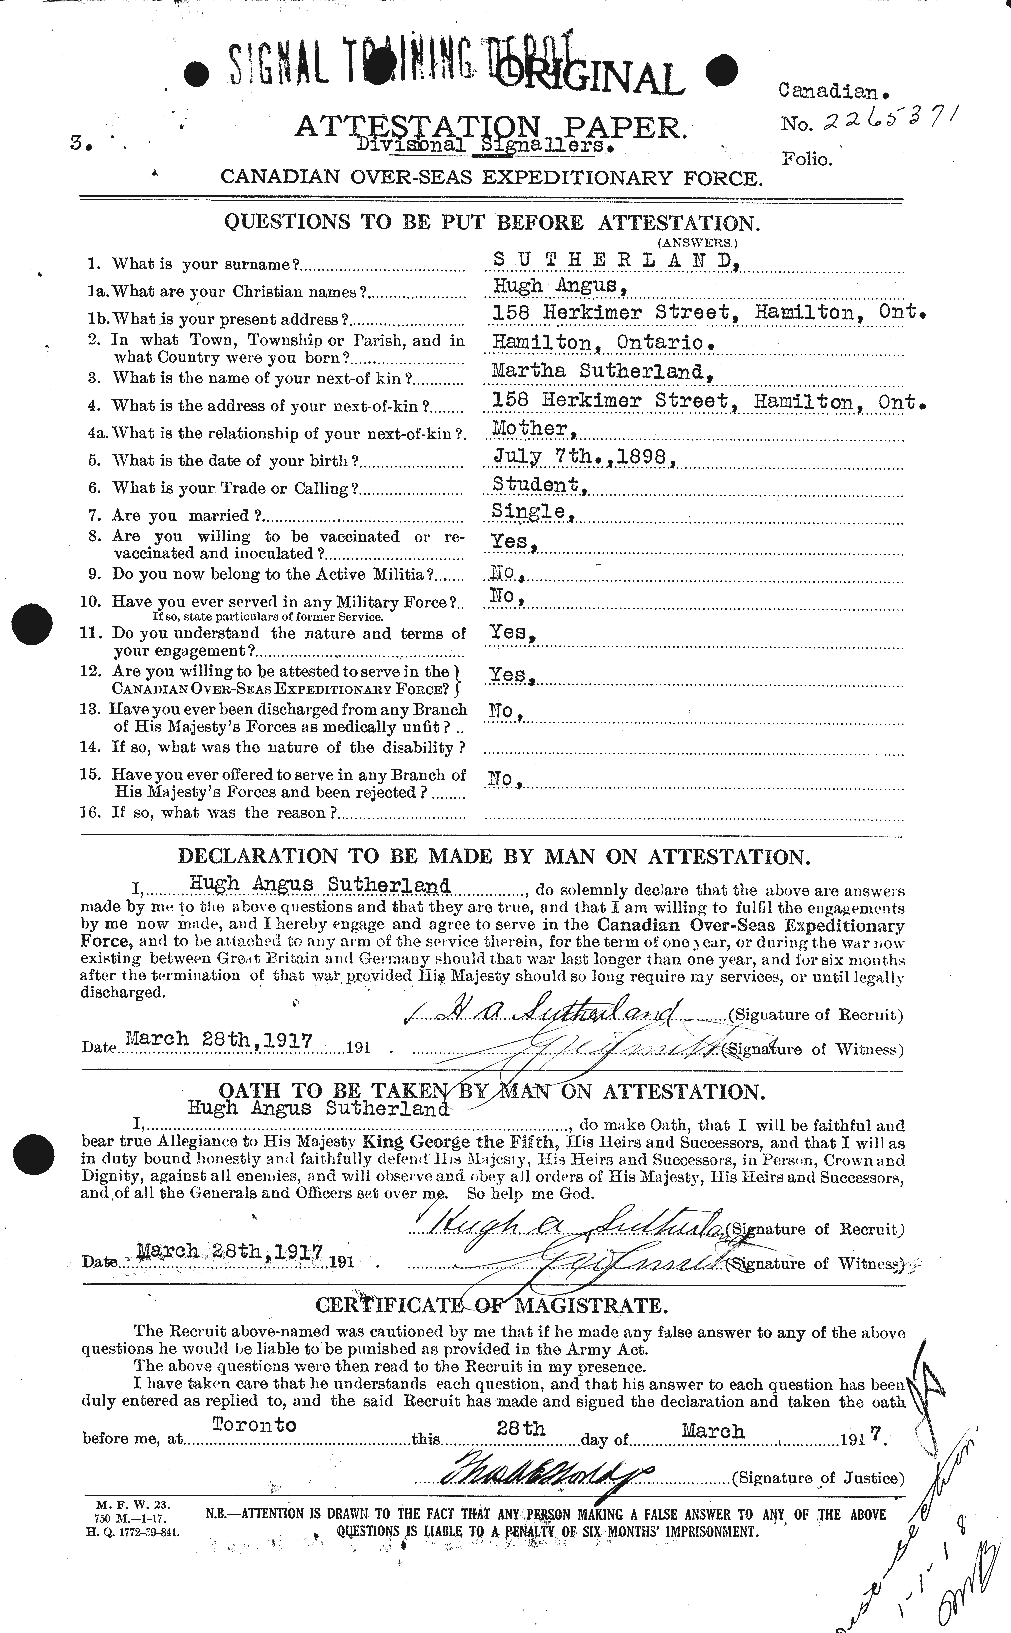 Personnel Records of the First World War - CEF 124789a